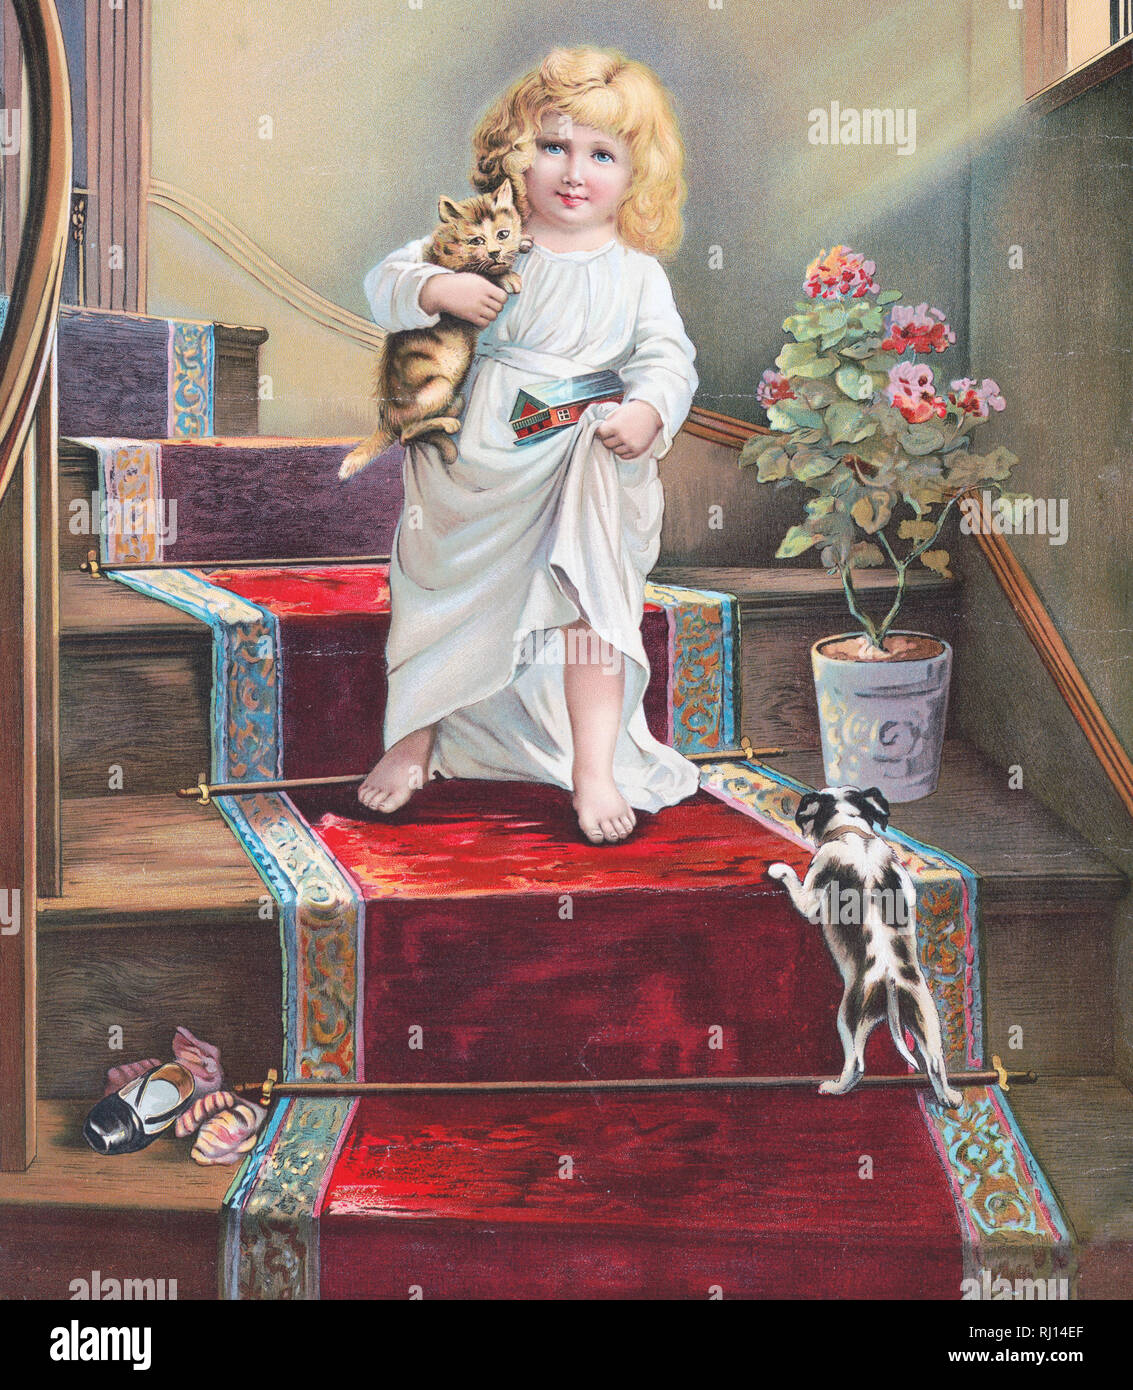 Print shows a young girl holding a kitten in her right arm and carrying a toy Noah's Ark(?) in her left hand, coming down stairs that are carpeted with a runner, a puppy is waiting to greet them; Stock Photo